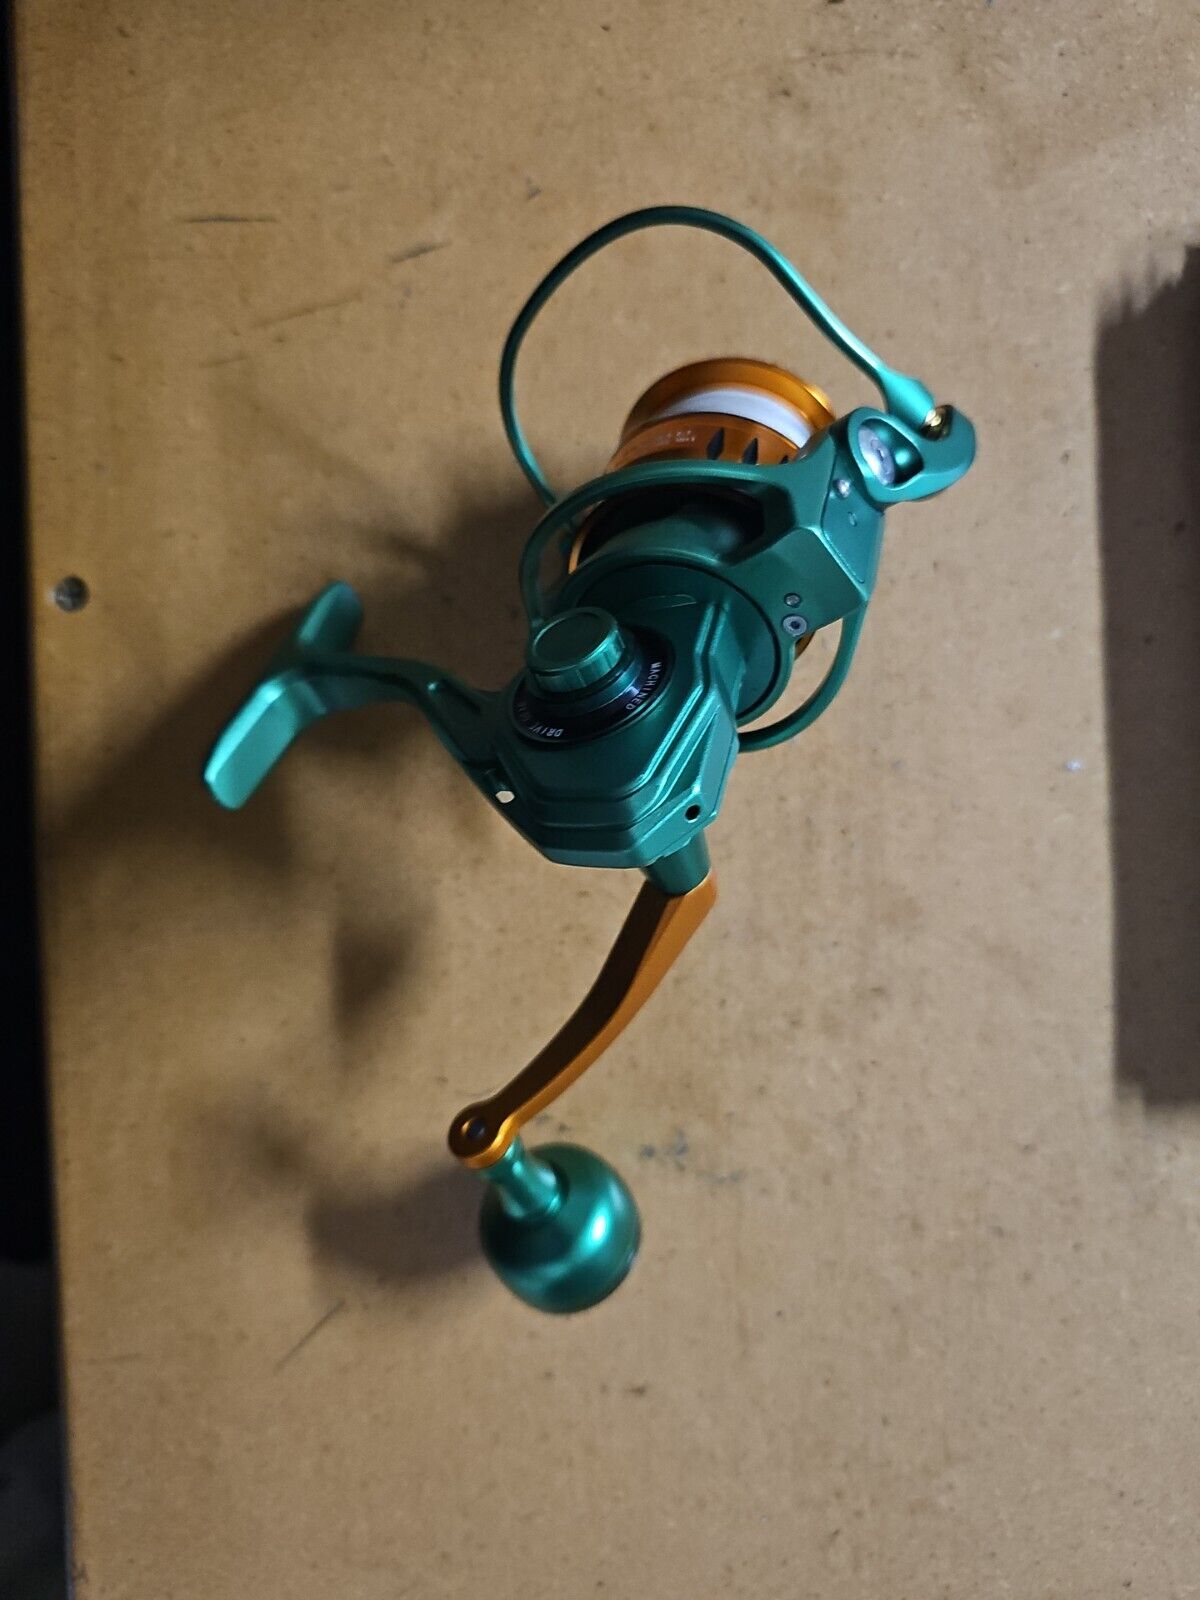 CAMEKOON Saltwater Spinning Used Once Fishing Reel Aluminum Body Rotor